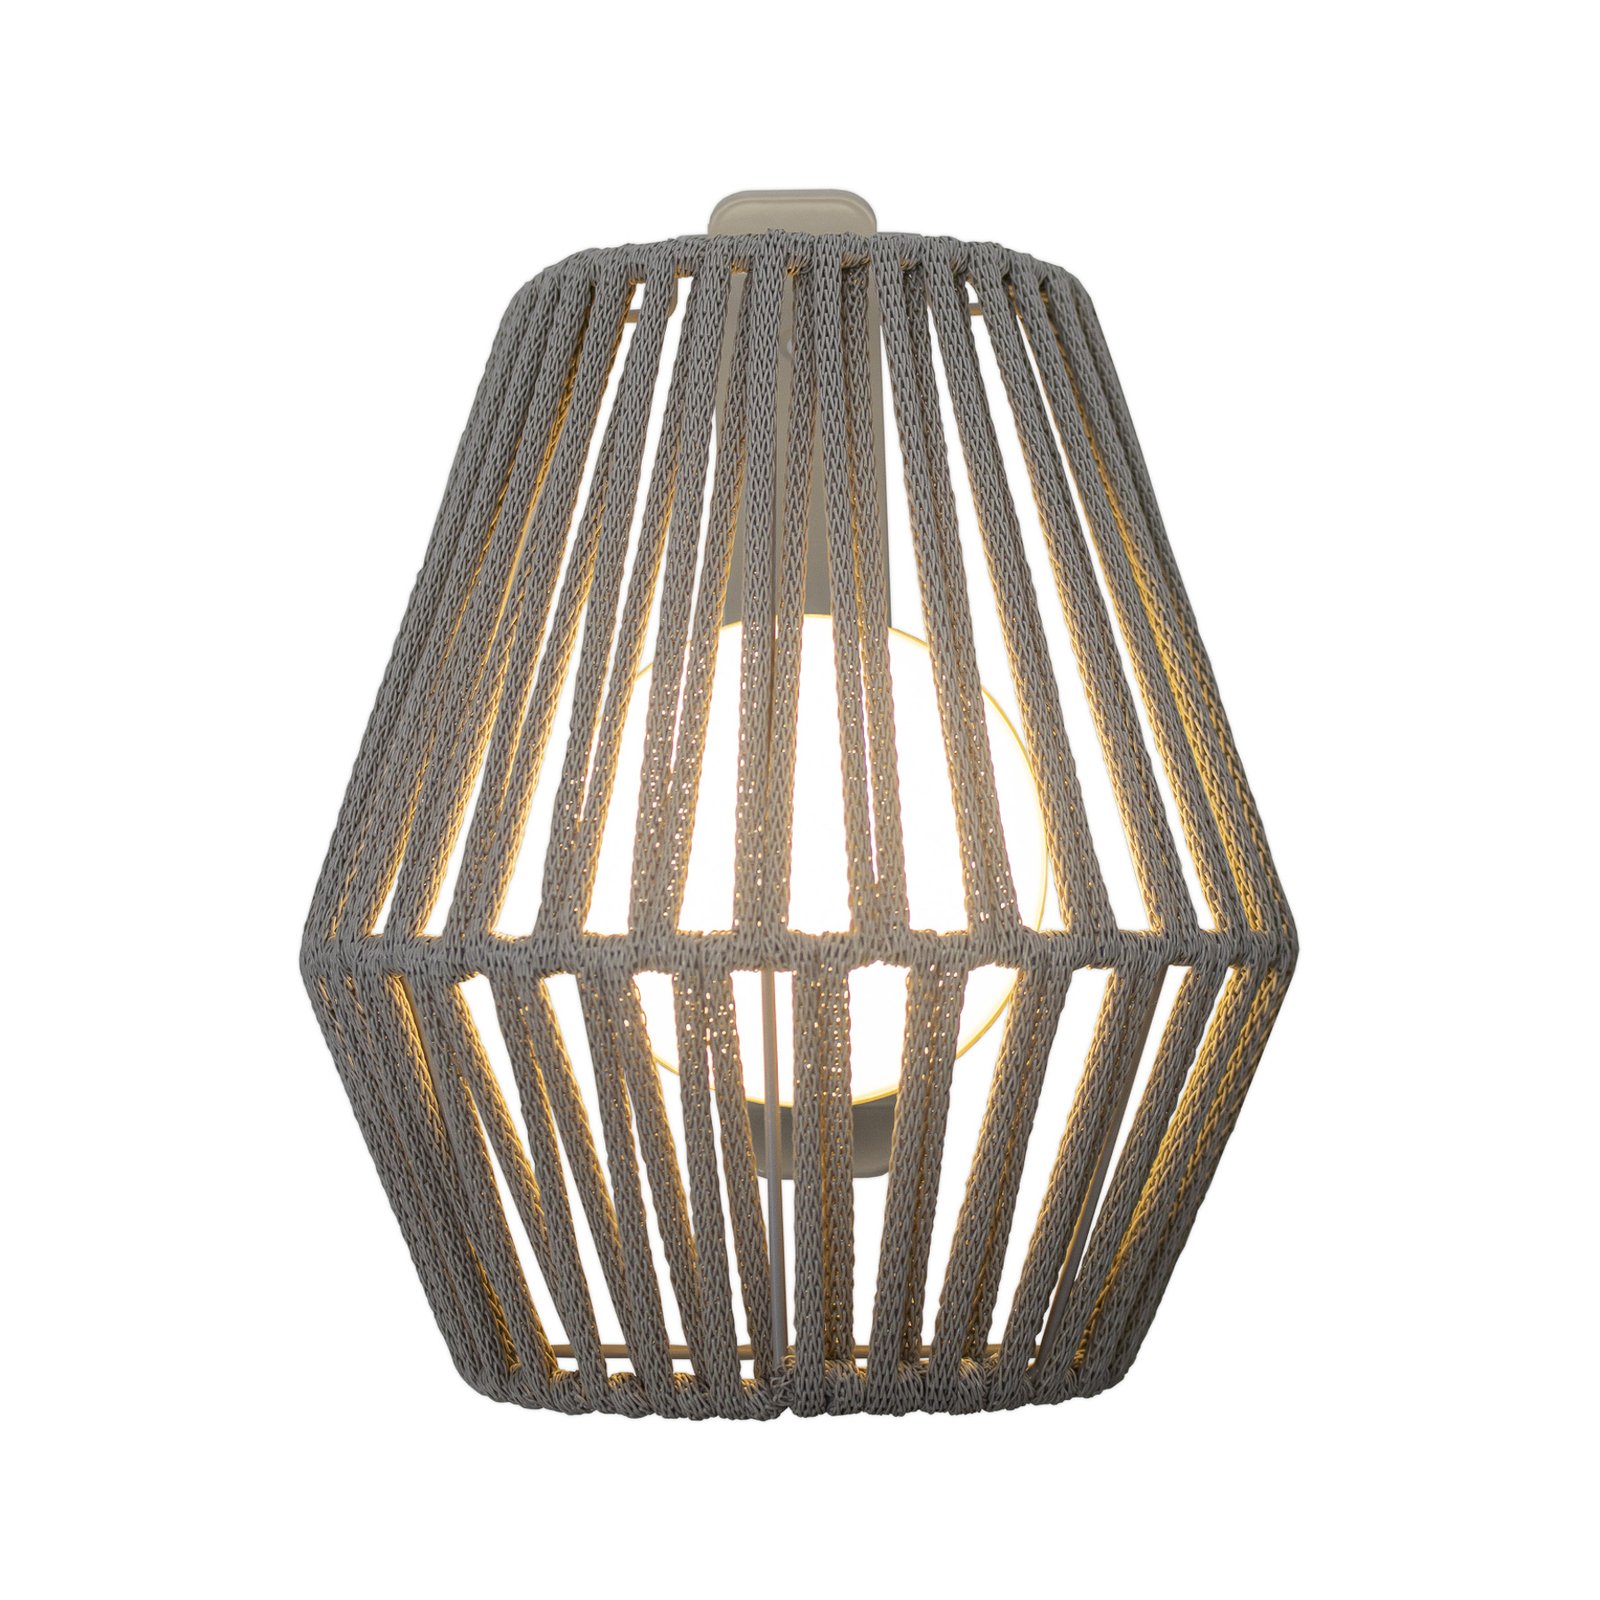 Newgarden Conta LED outdoor wall light, taupe